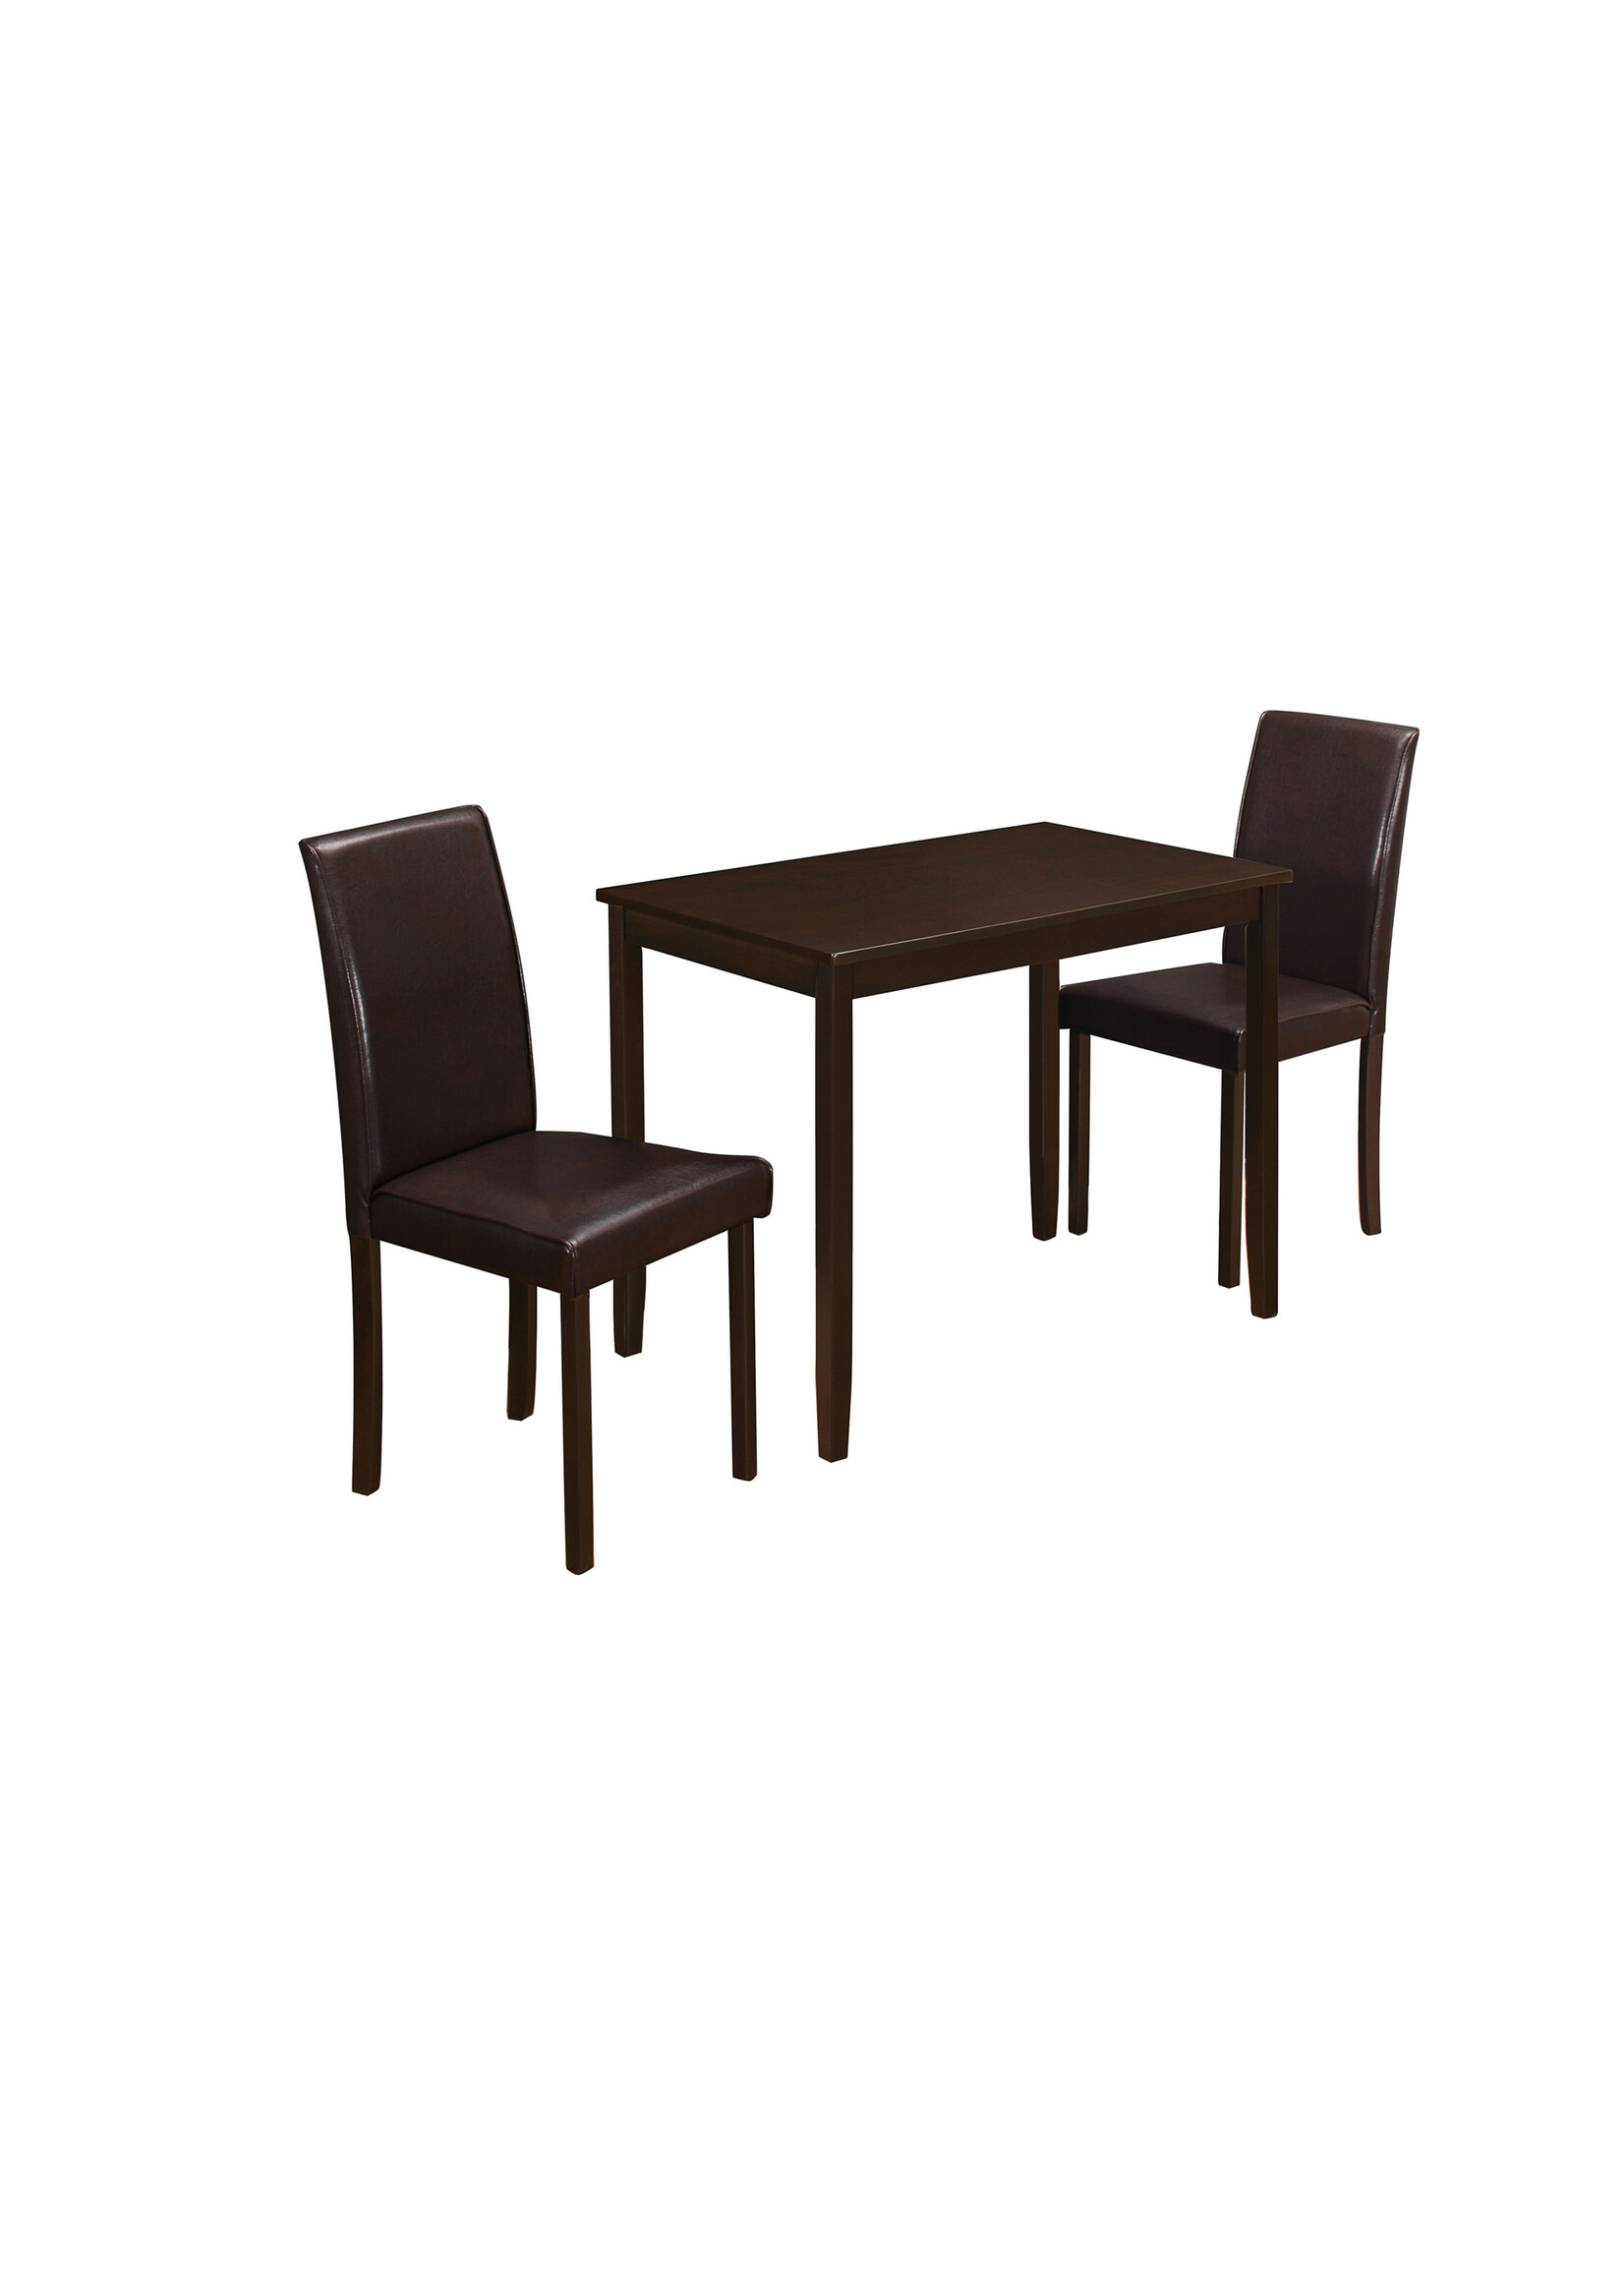 DINING SET - 3PCS SET / CAPPUCCINO / BROWN PARSON CHAIRS